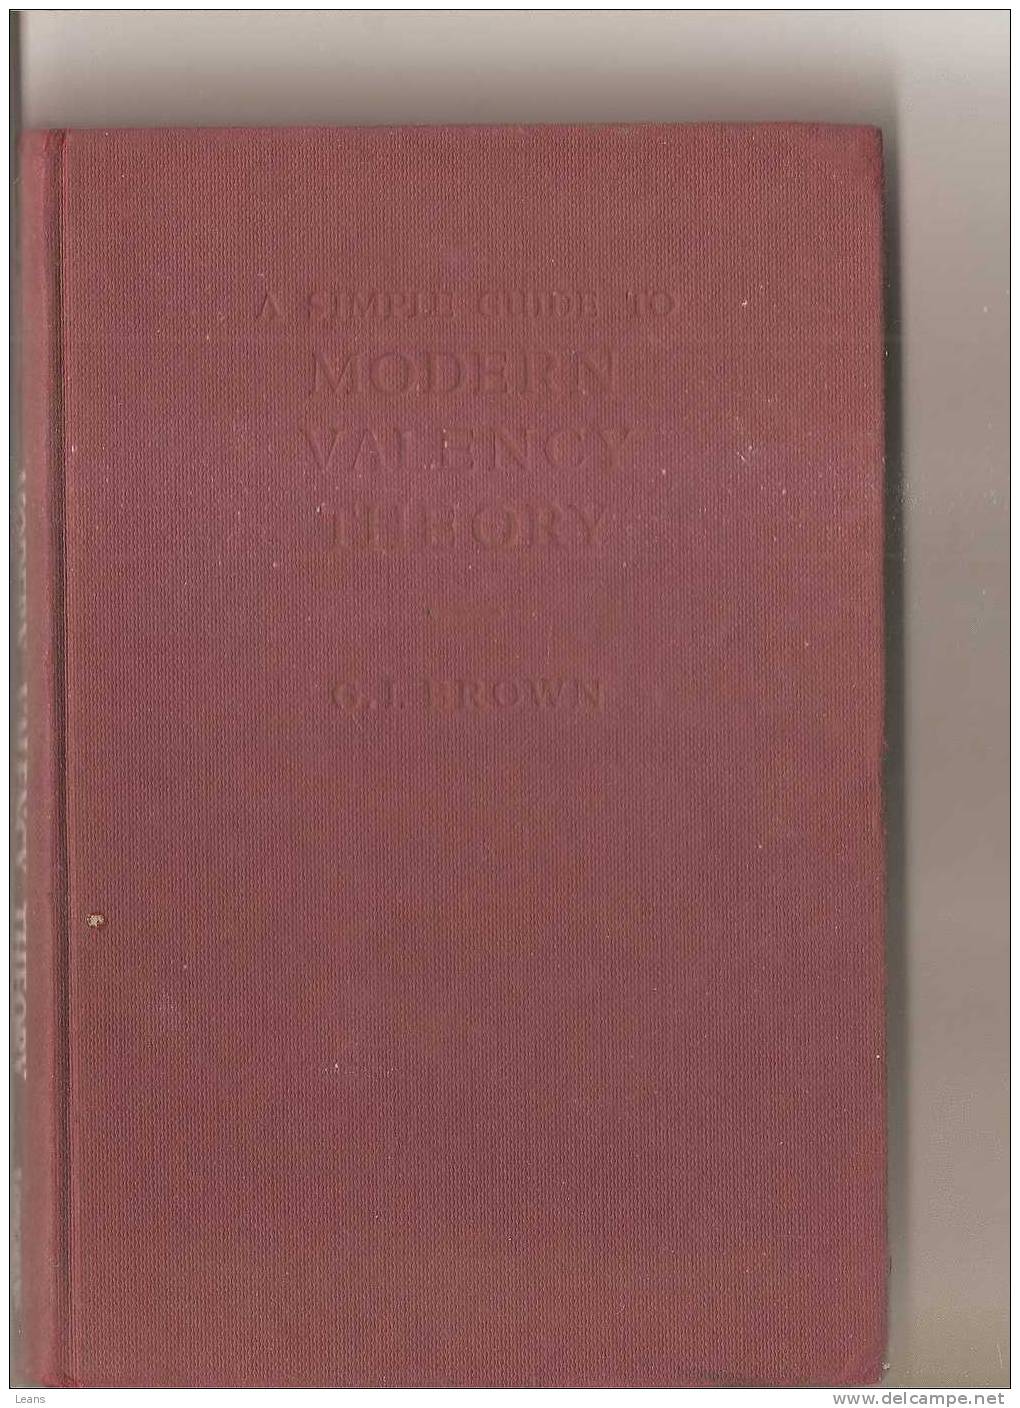 A SIMPLE GUIDE TO MODERN VALENCY THEORY    Ed: BROWN - Sciences